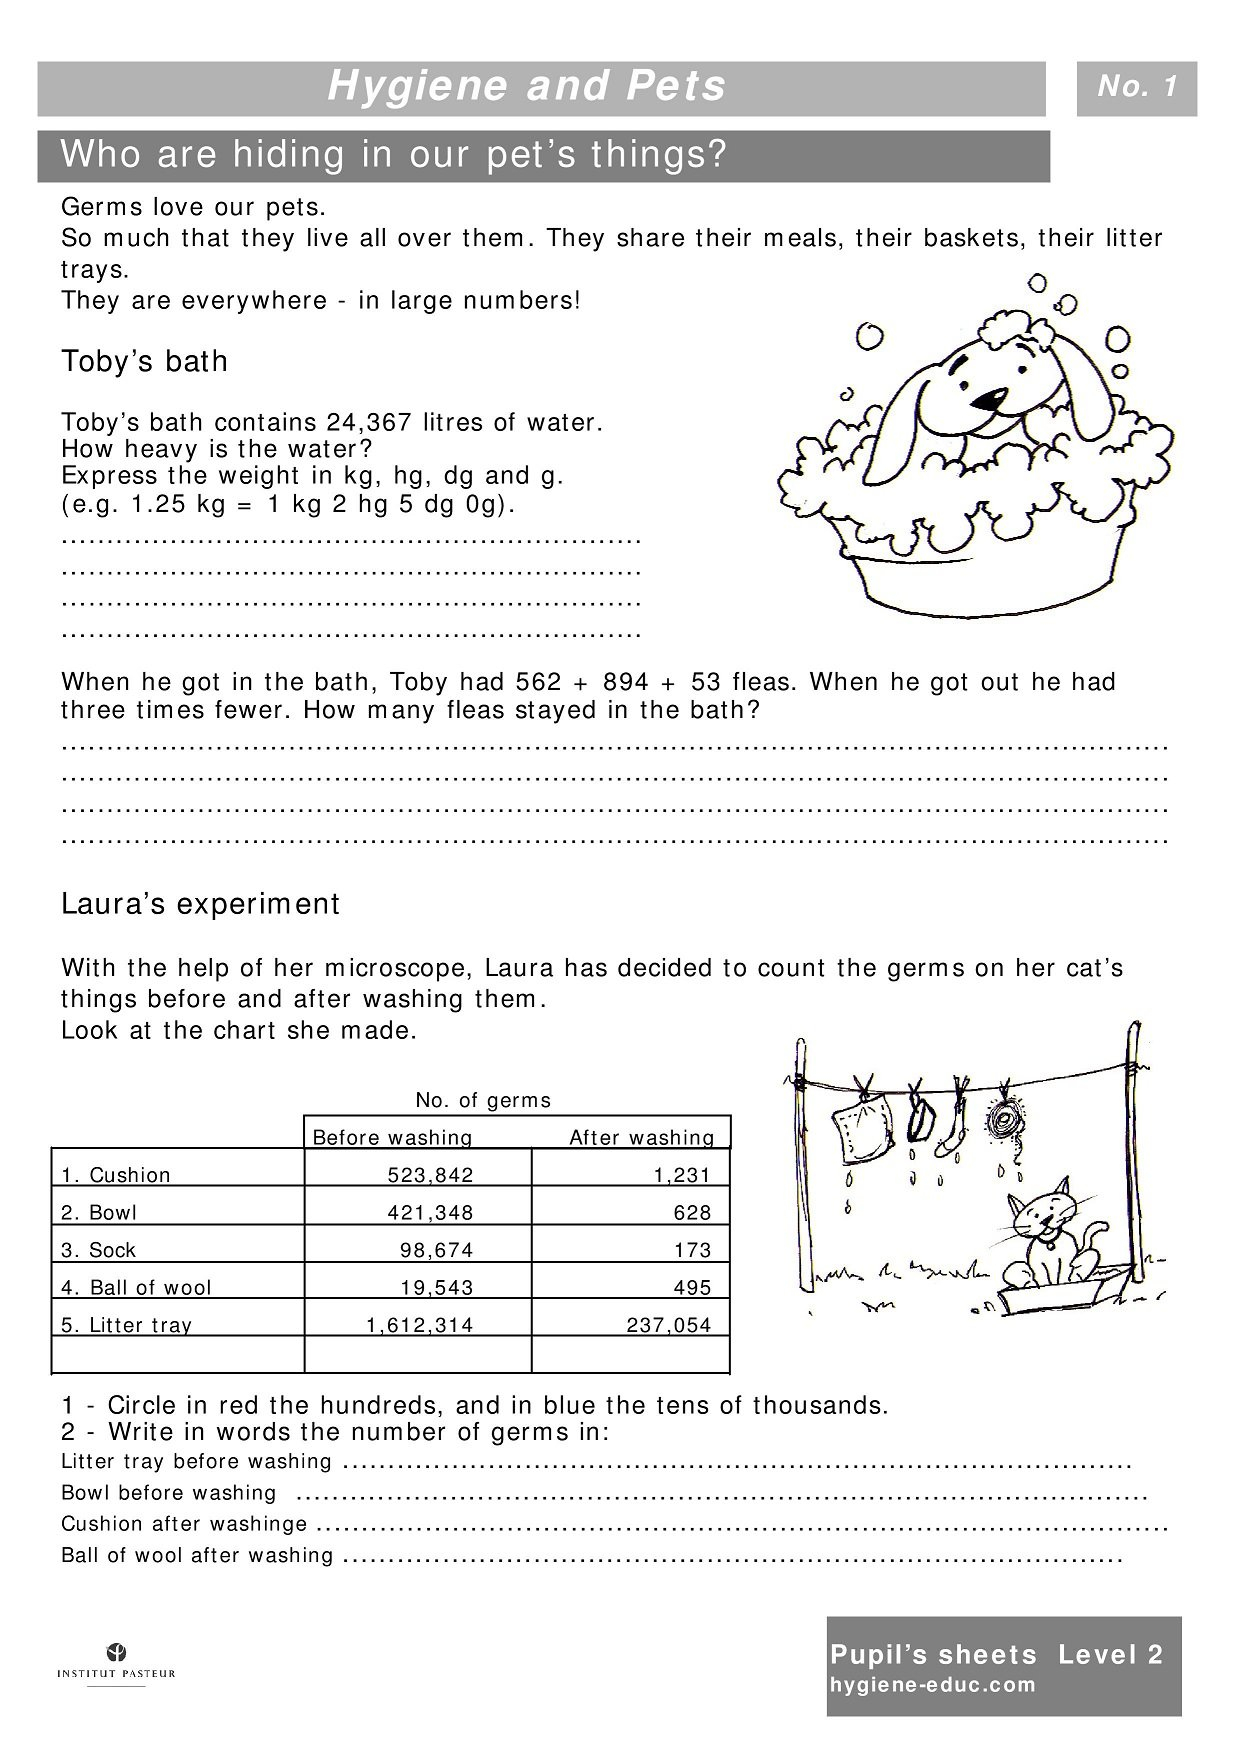 Hygiene And Pets Worksheets For Kids Level 2  Personal Hygiene As Well As Sleep Hygiene Worksheet